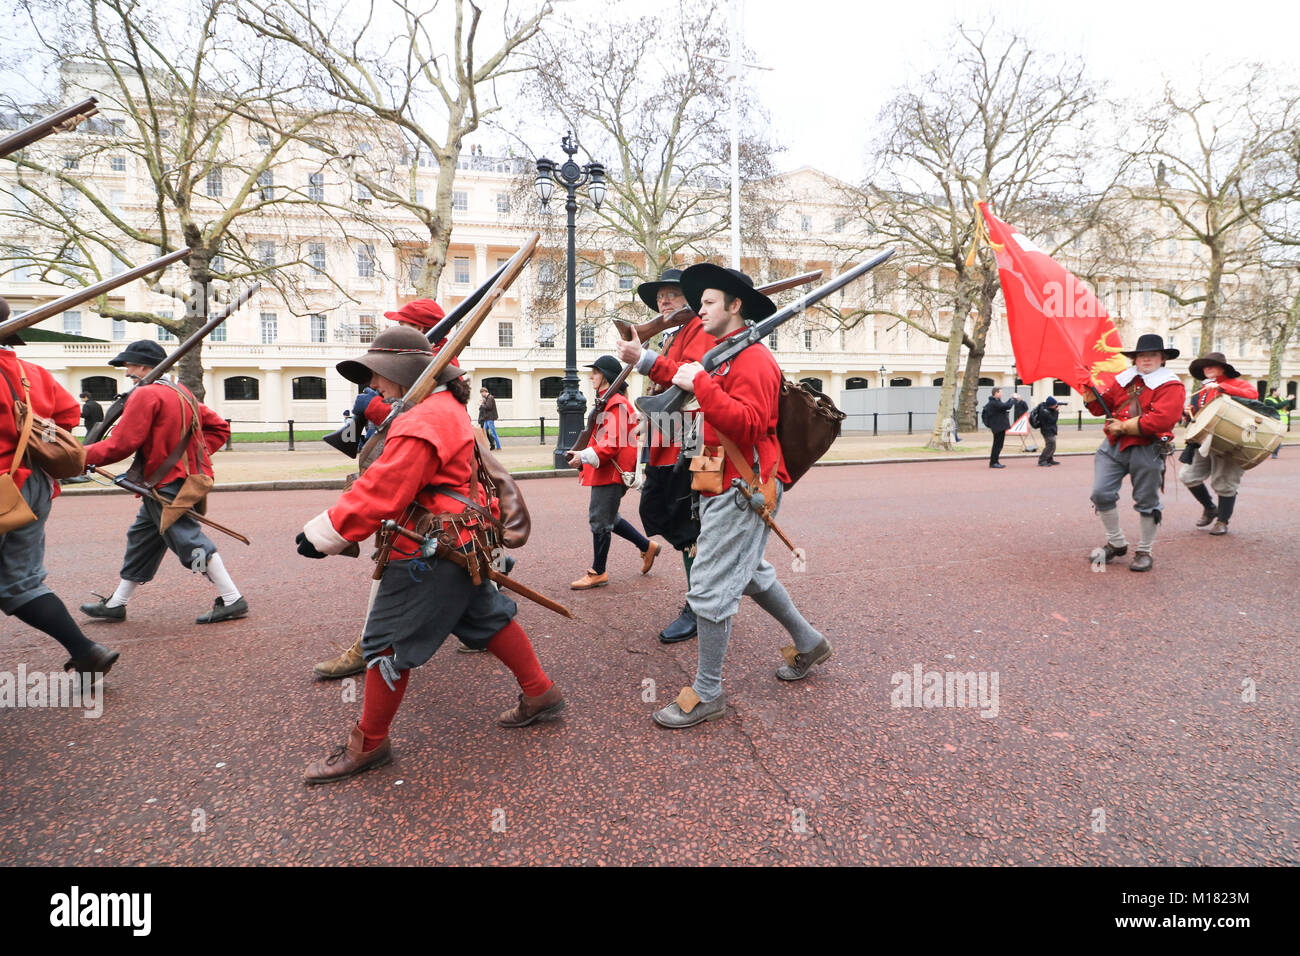 London UK. 28th January 2018.  Members of King's Army of the English Civil War Society  retrace the route taken by King Charles I from St James' Palace to the place of his execution at the Banqueting House in Whitehall on 30 January 1649 Credit: amer ghazzal/Alamy Live News Stock Photo